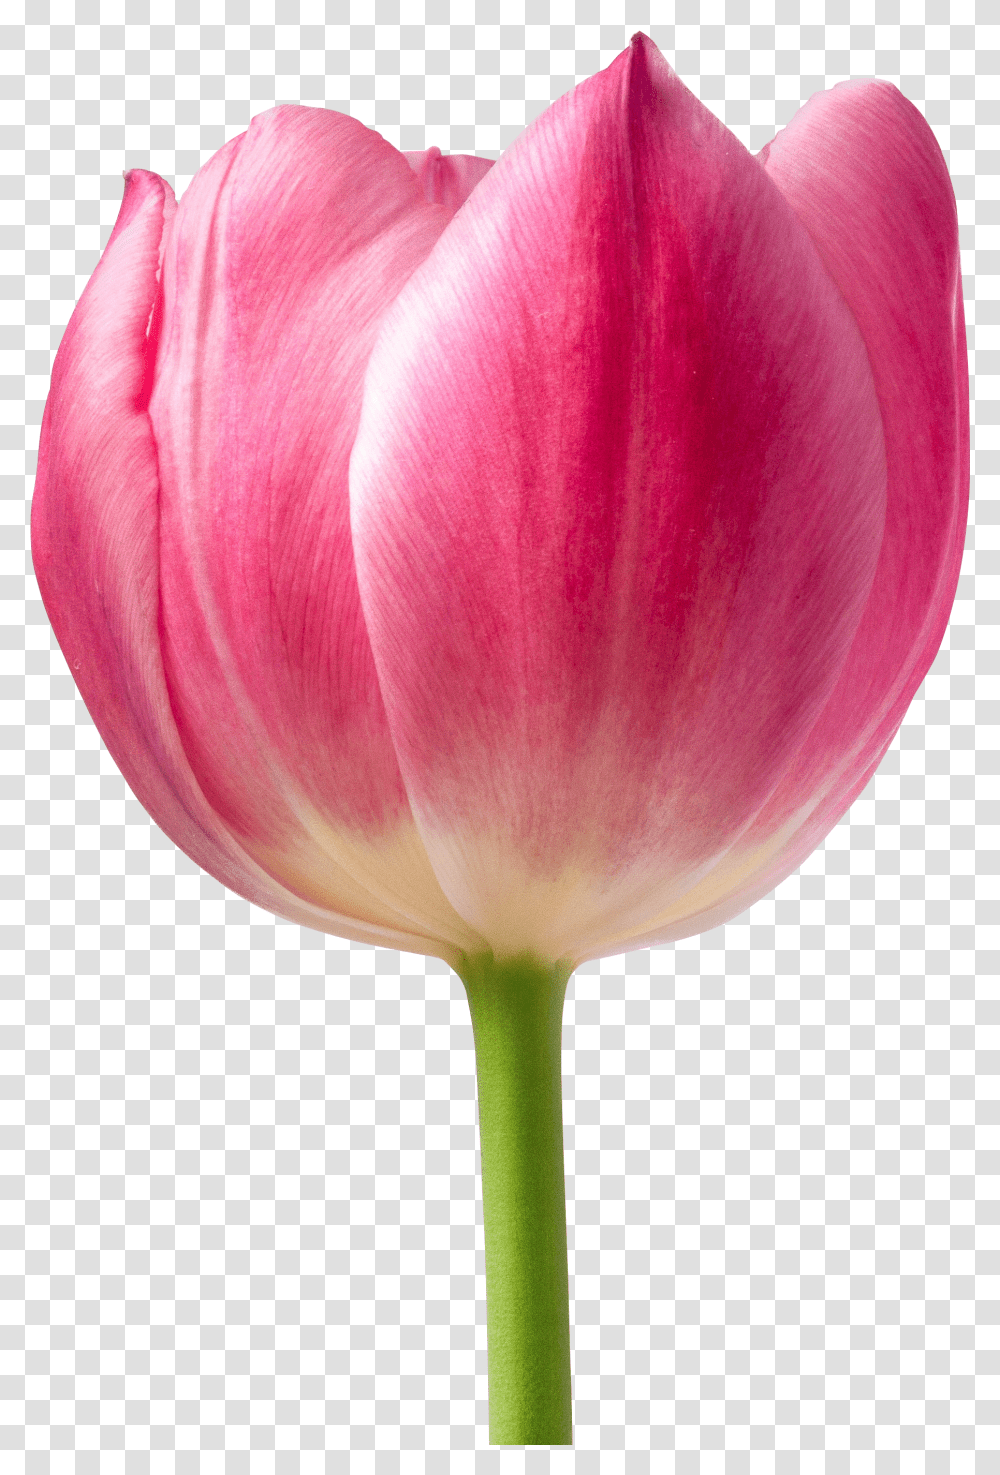 Pink Tulip Flower - For Free Tulip Images Of Flowers Transparent Png